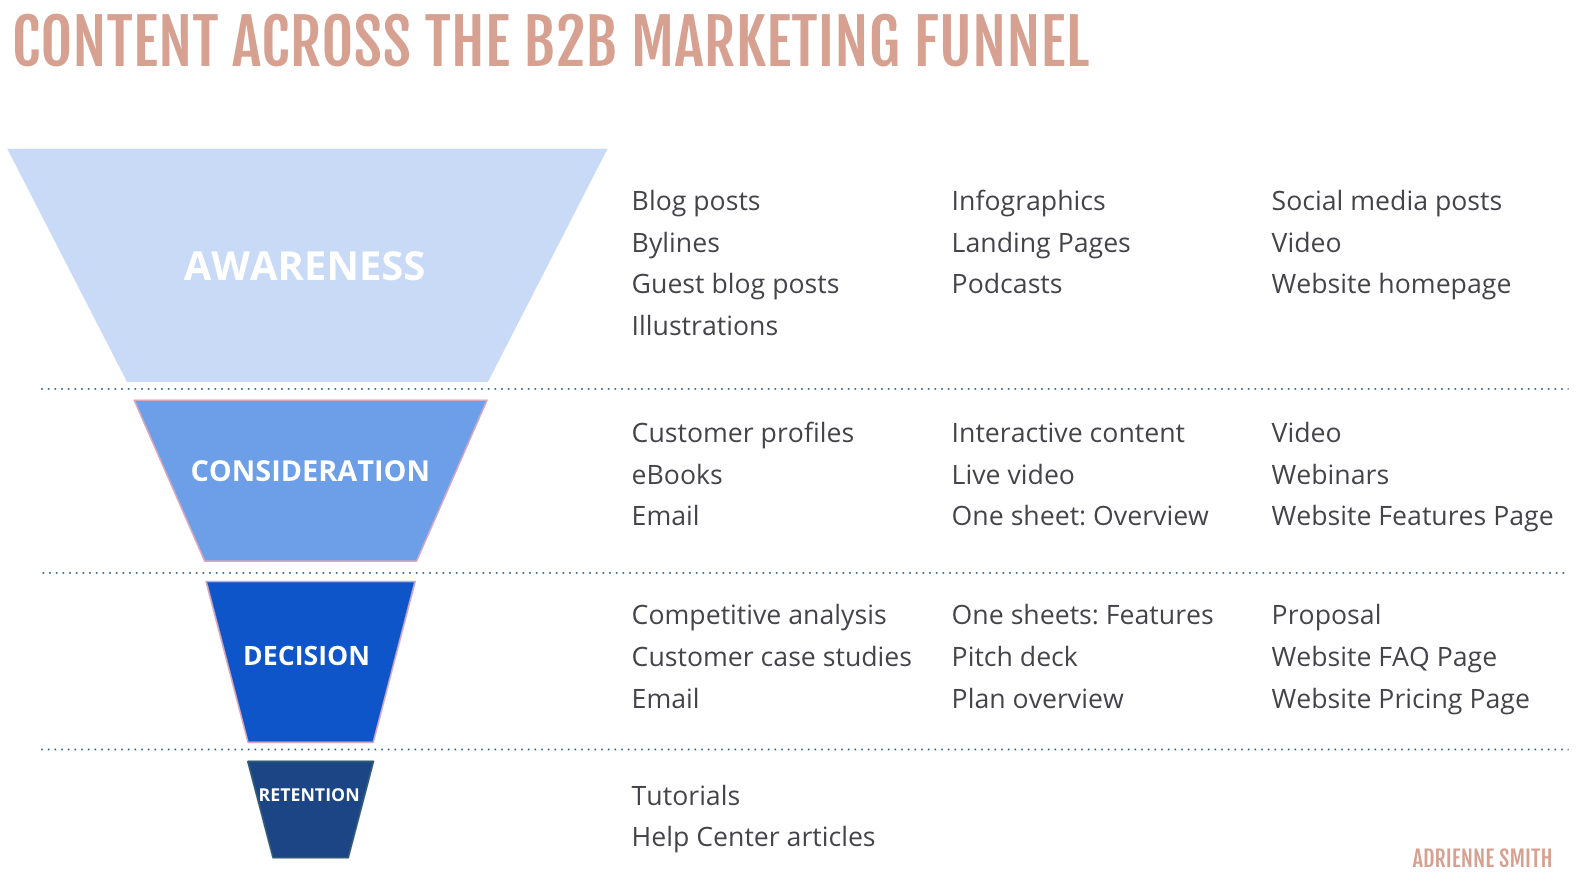 Types of content for each segment of the marketing funnel. Top-of-the-funnel content includes blog posts, infographics, and landing pages.